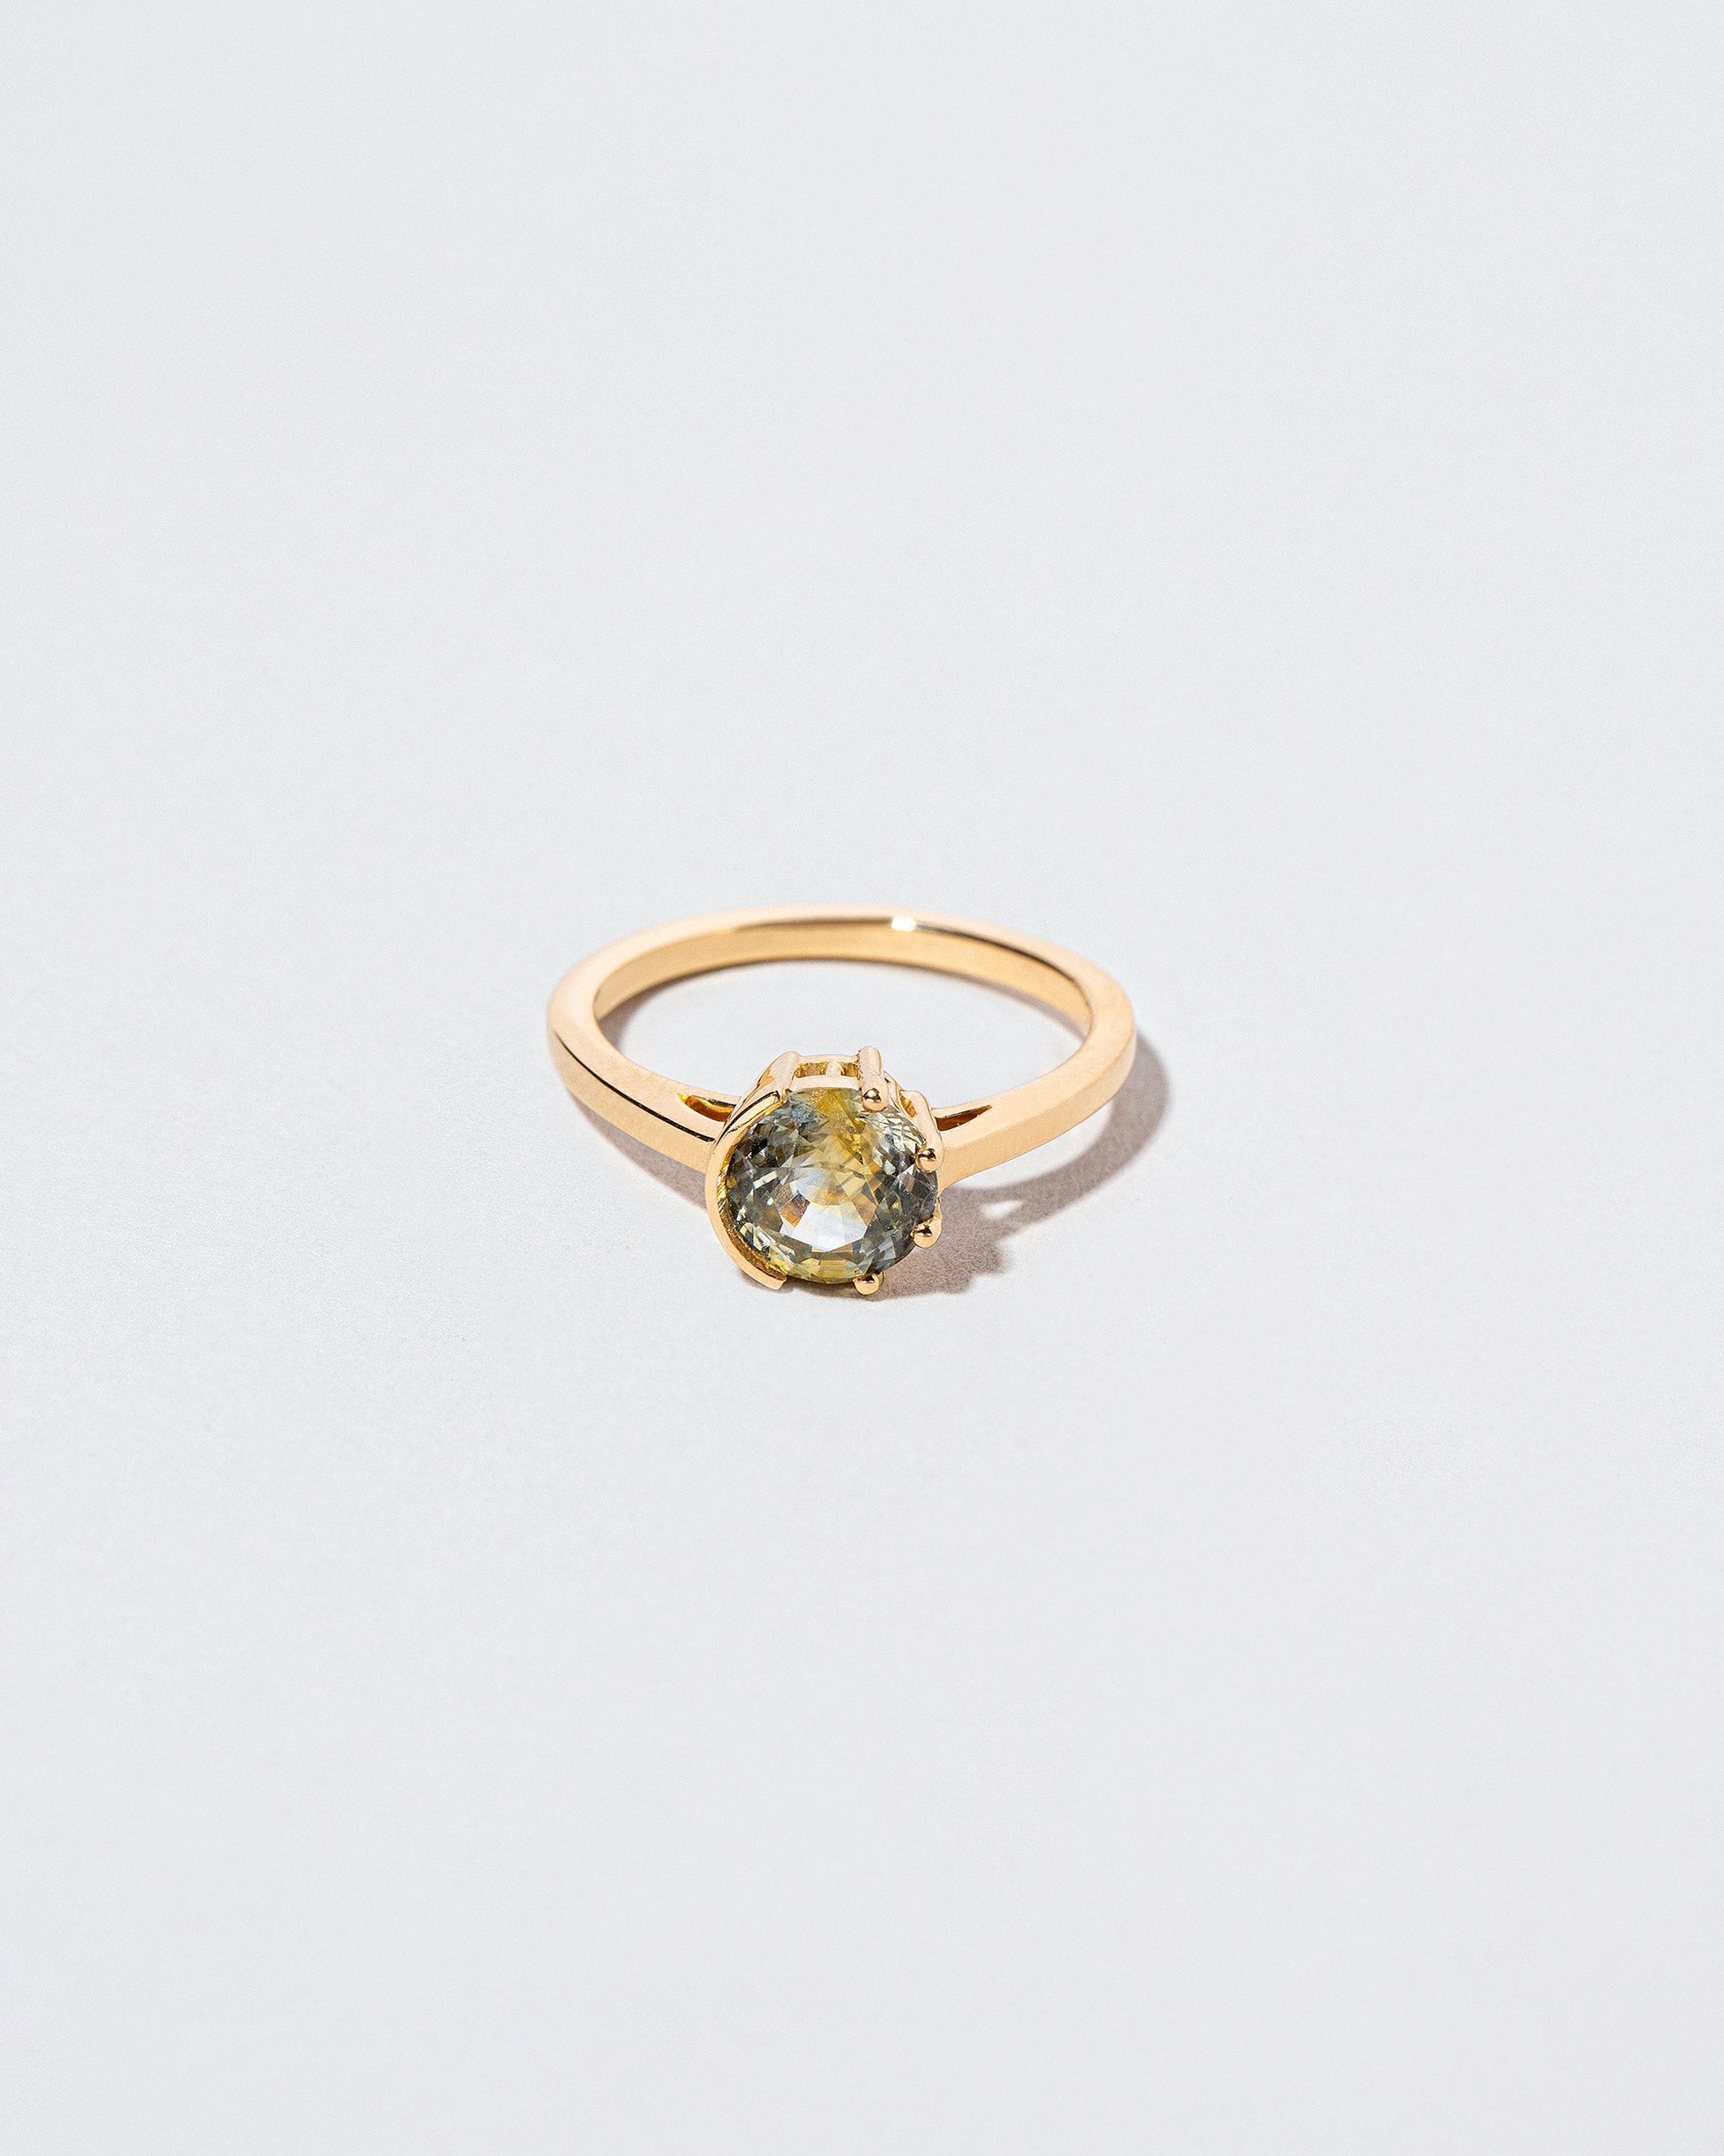  Sun & Moon Ring - Bicolor Sapphire on light color background.